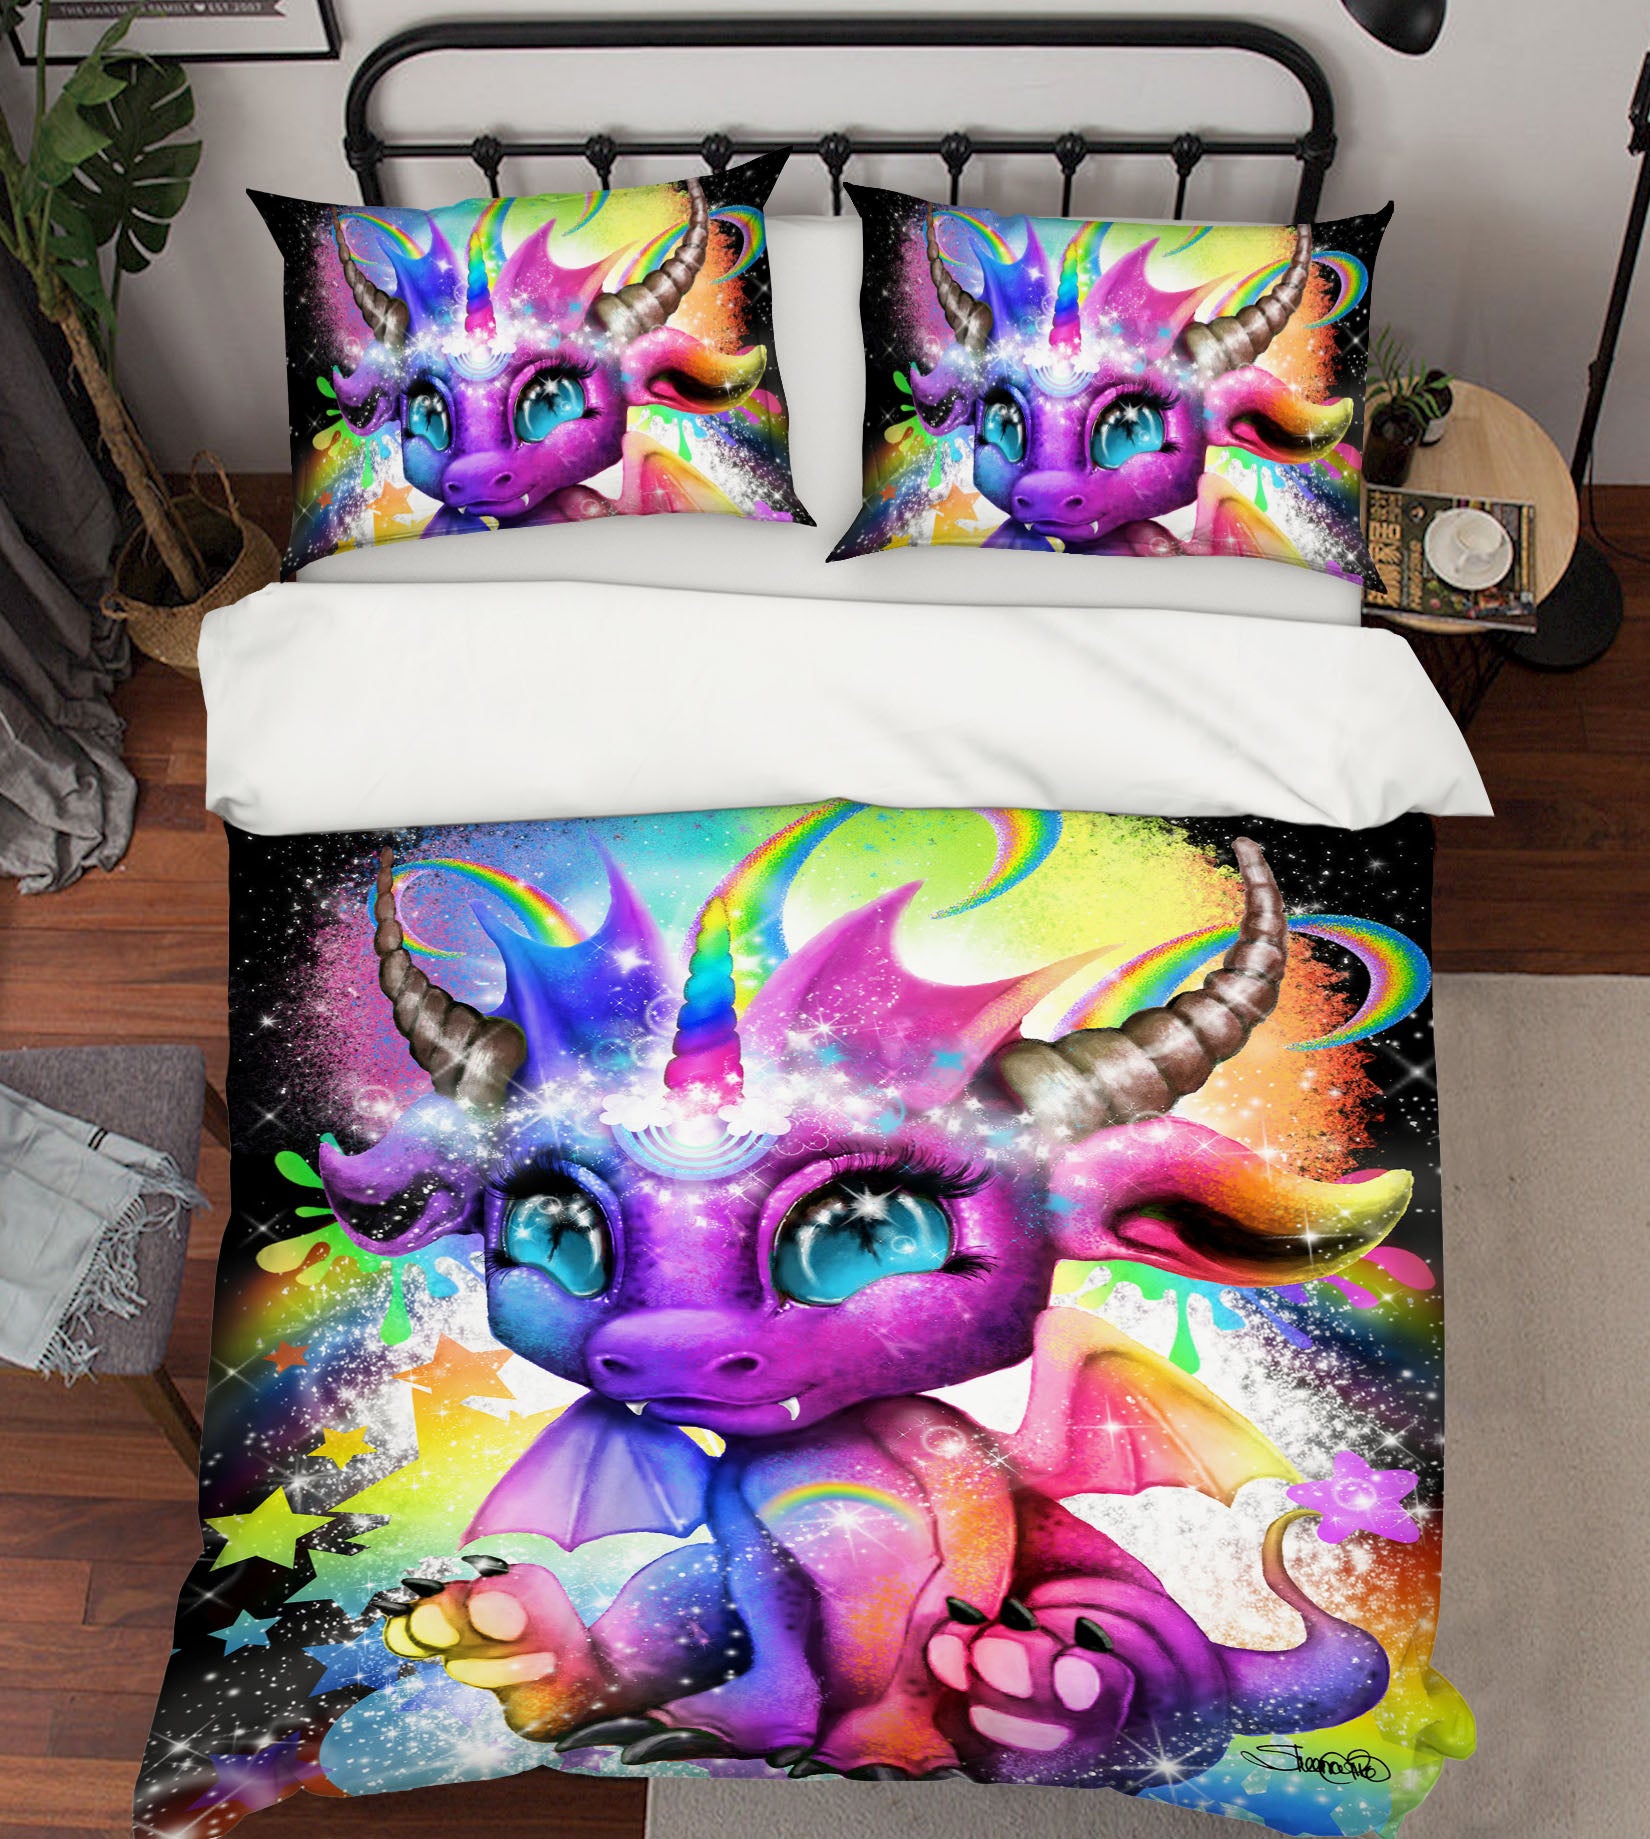 3D Rainbow Dragon 8596 Sheena Pike Bedding Bed Pillowcases Quilt Cover Duvet Cover